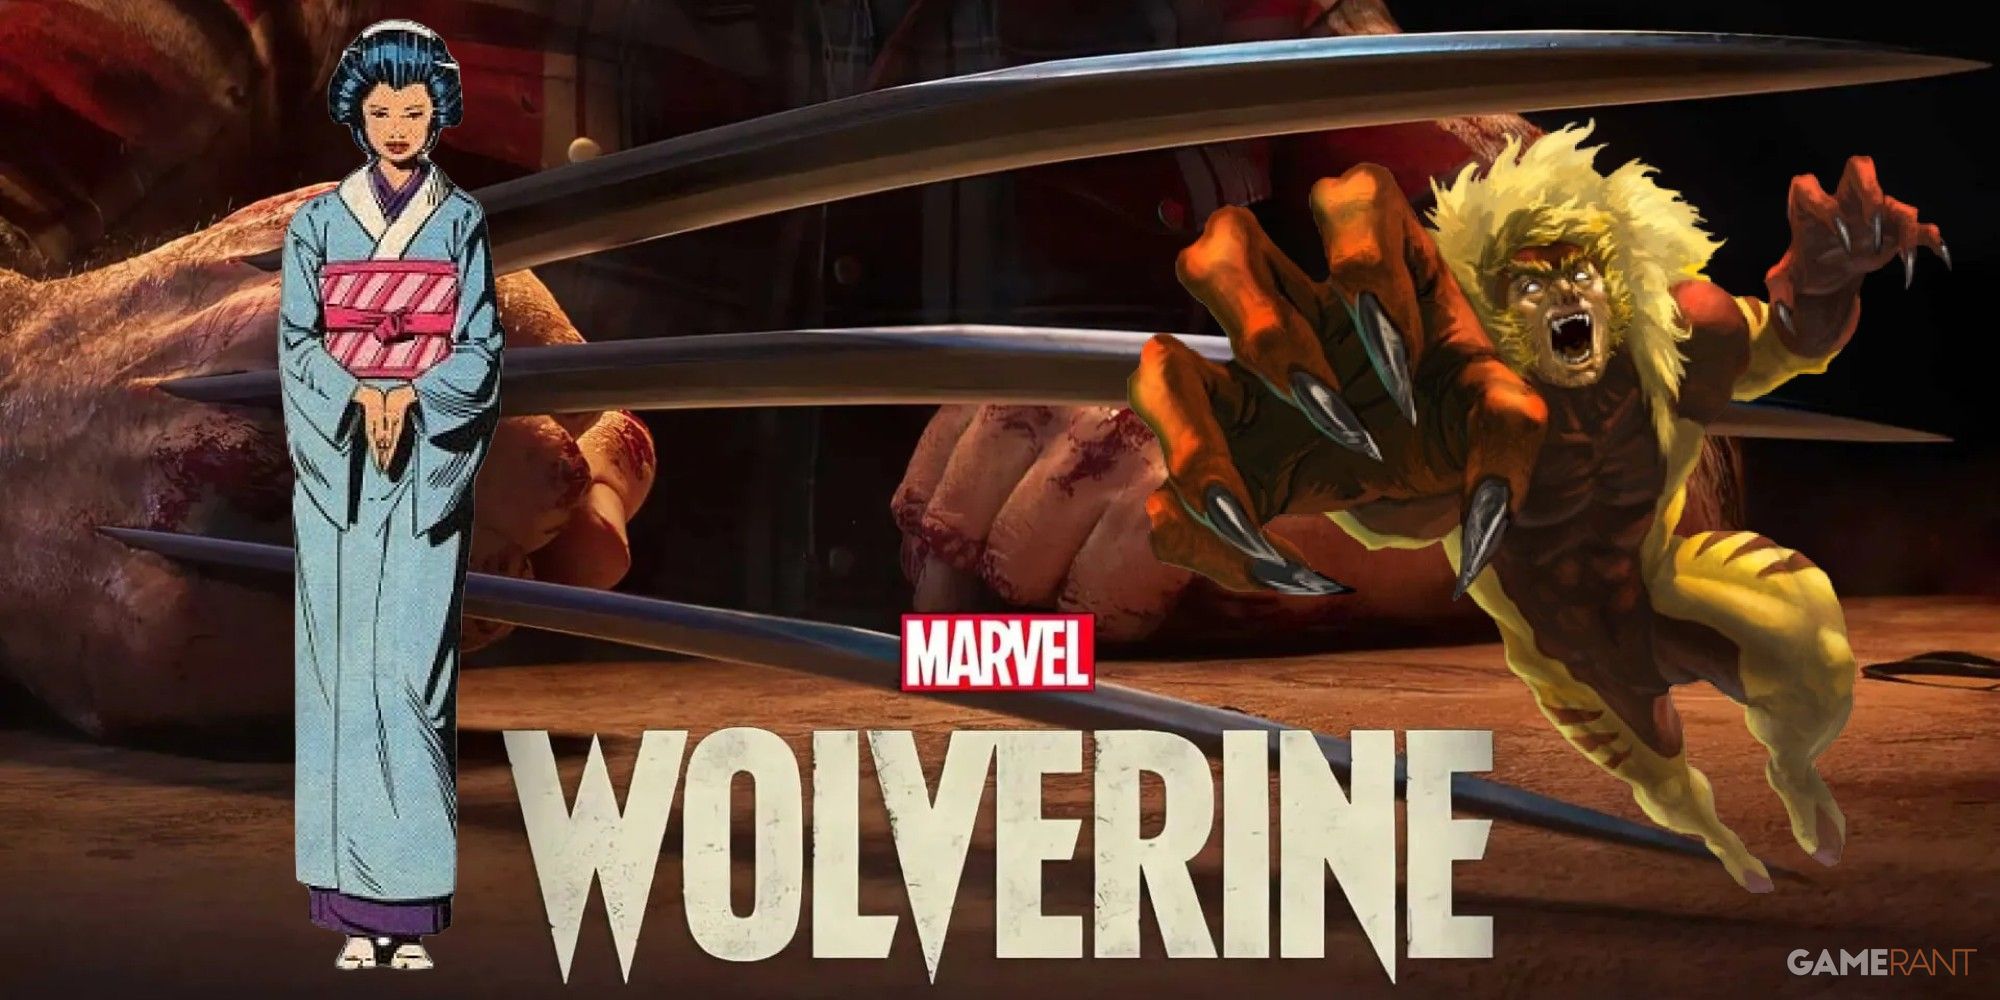 Mariko and Sabretooth in front of Marvel's Wolverine logo